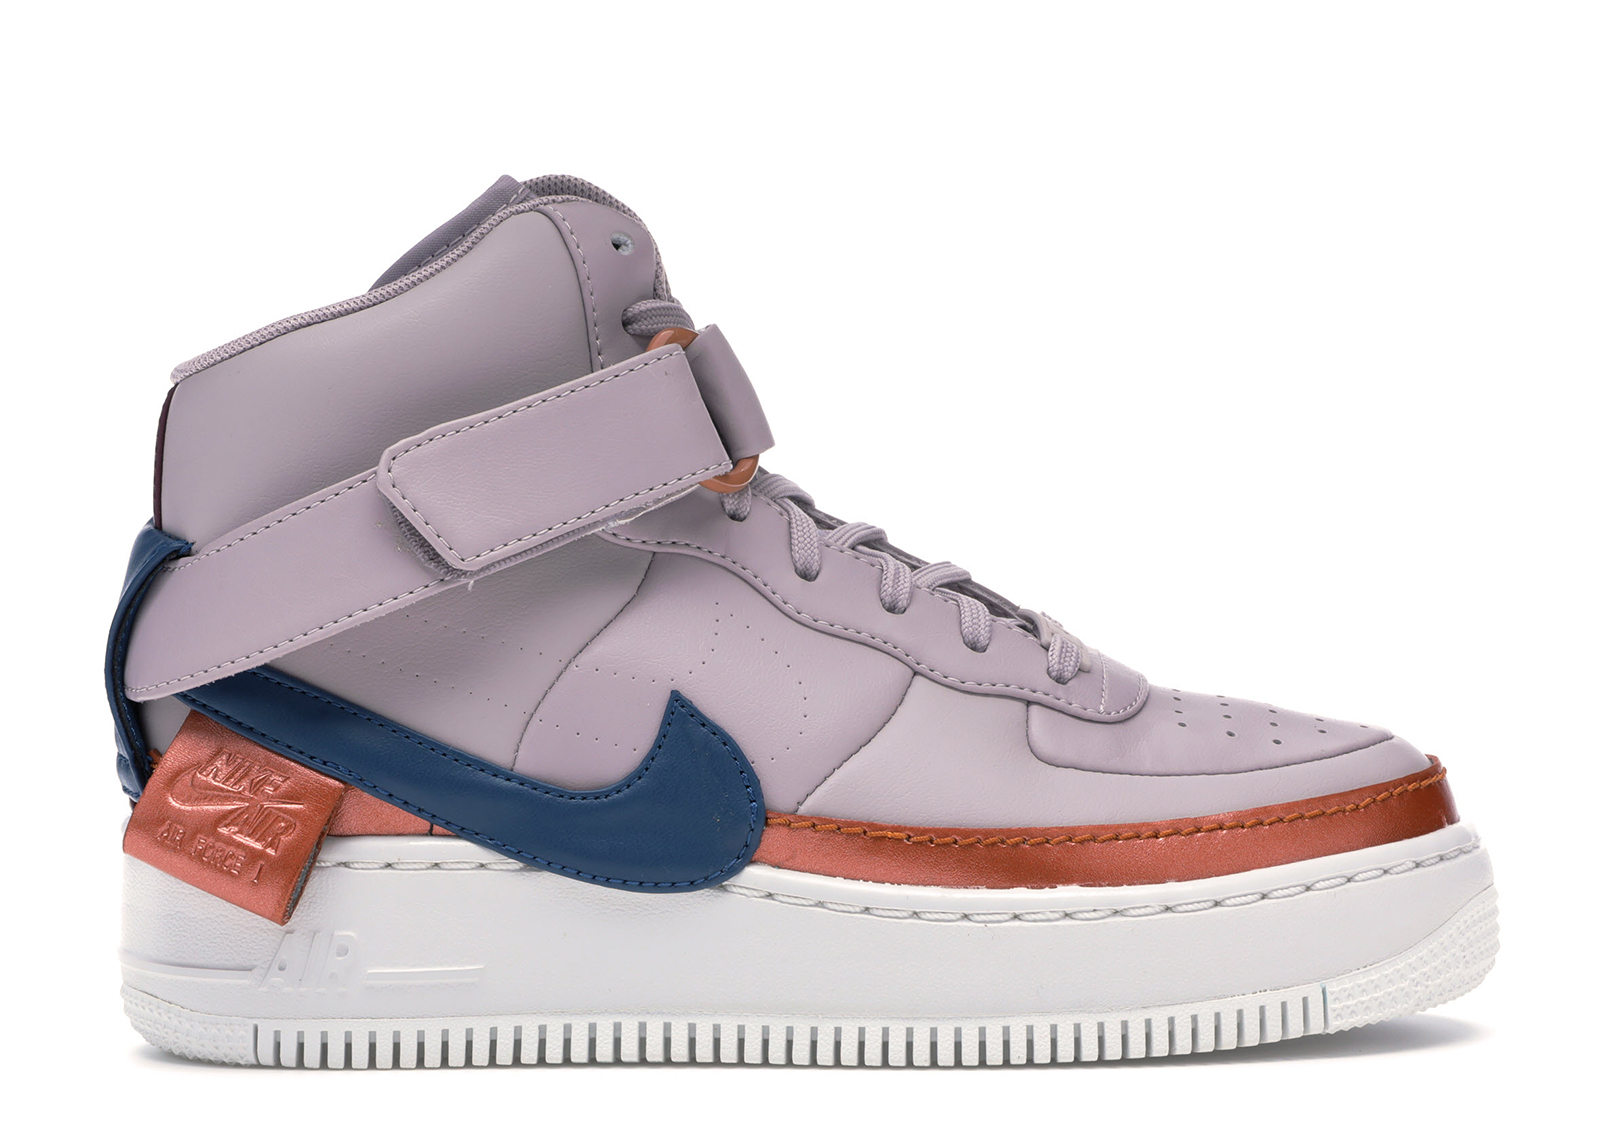 Nike Air Force 1 High Jester XX Violet Ash (Women's) - AR0625-500 - US